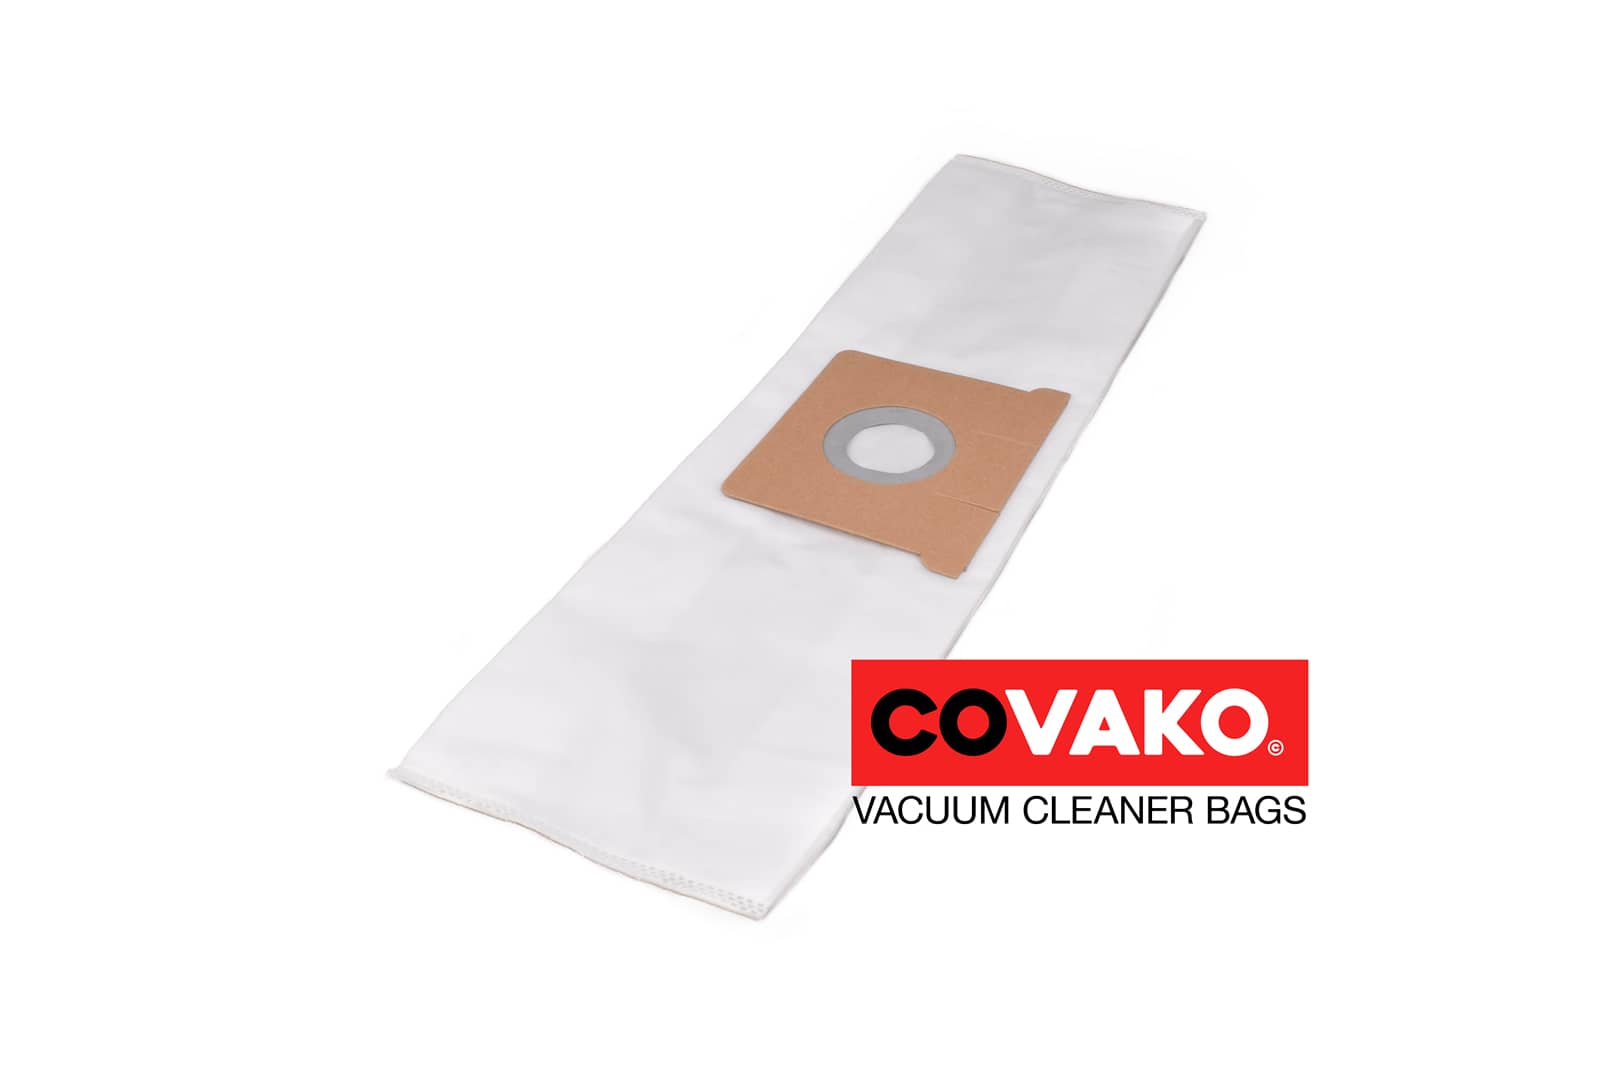 Tennant V 5 / Synthesis - Tennant vacuum cleaner bags